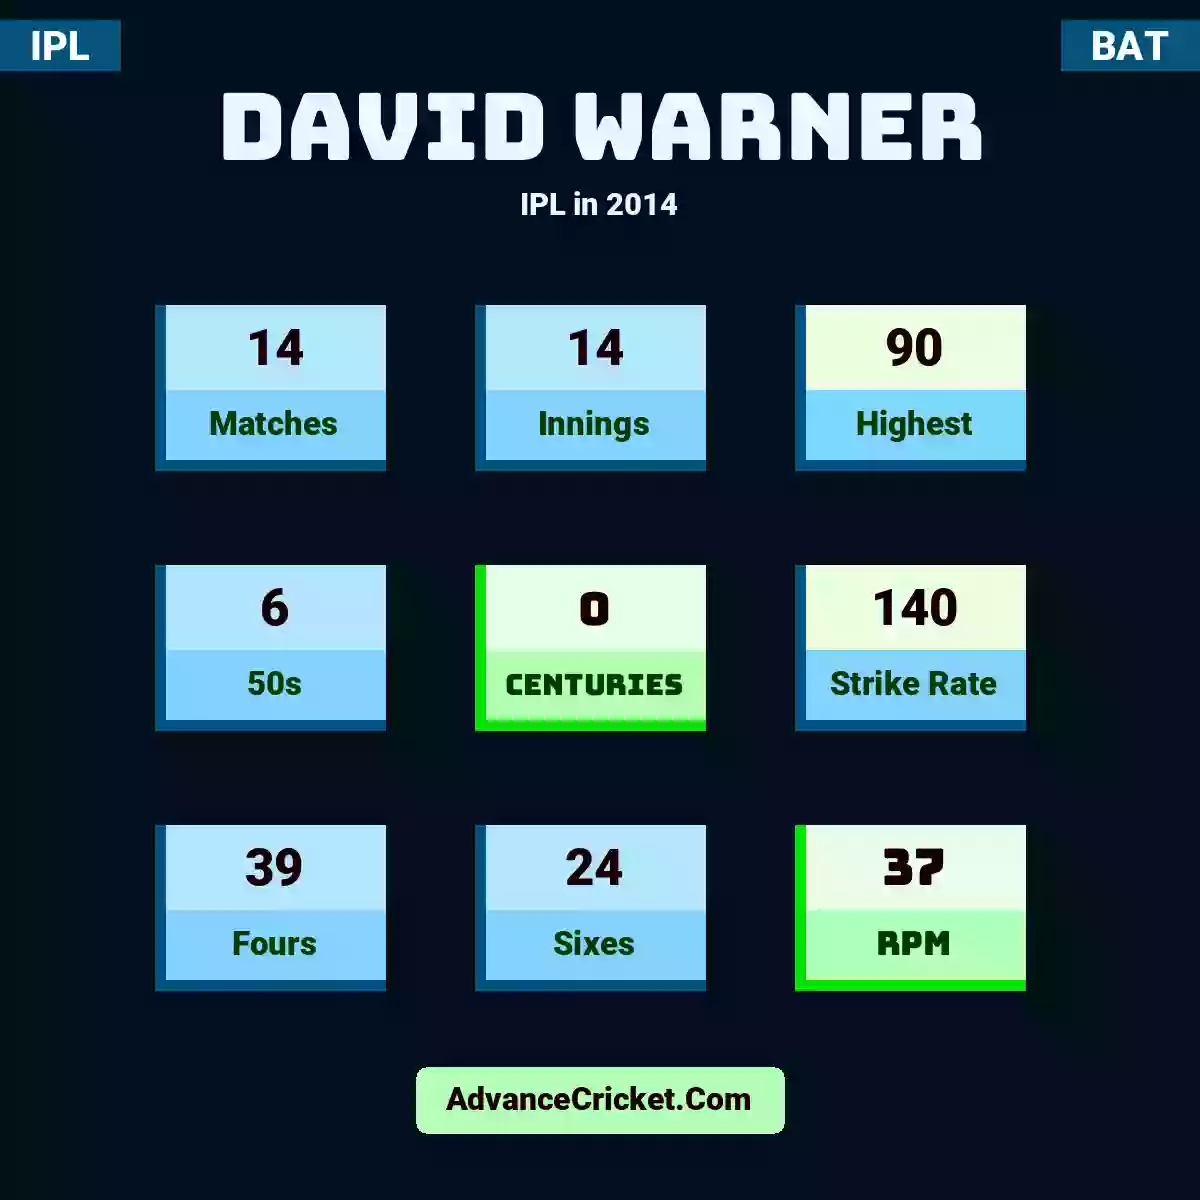 David Warner IPL  in 2014, David Warner played 14 matches, scored 90 runs as highest, 6 half-centuries, and 0 centuries, with a strike rate of 140. D.Warner hit 39 fours and 24 sixes, with an RPM of 37.